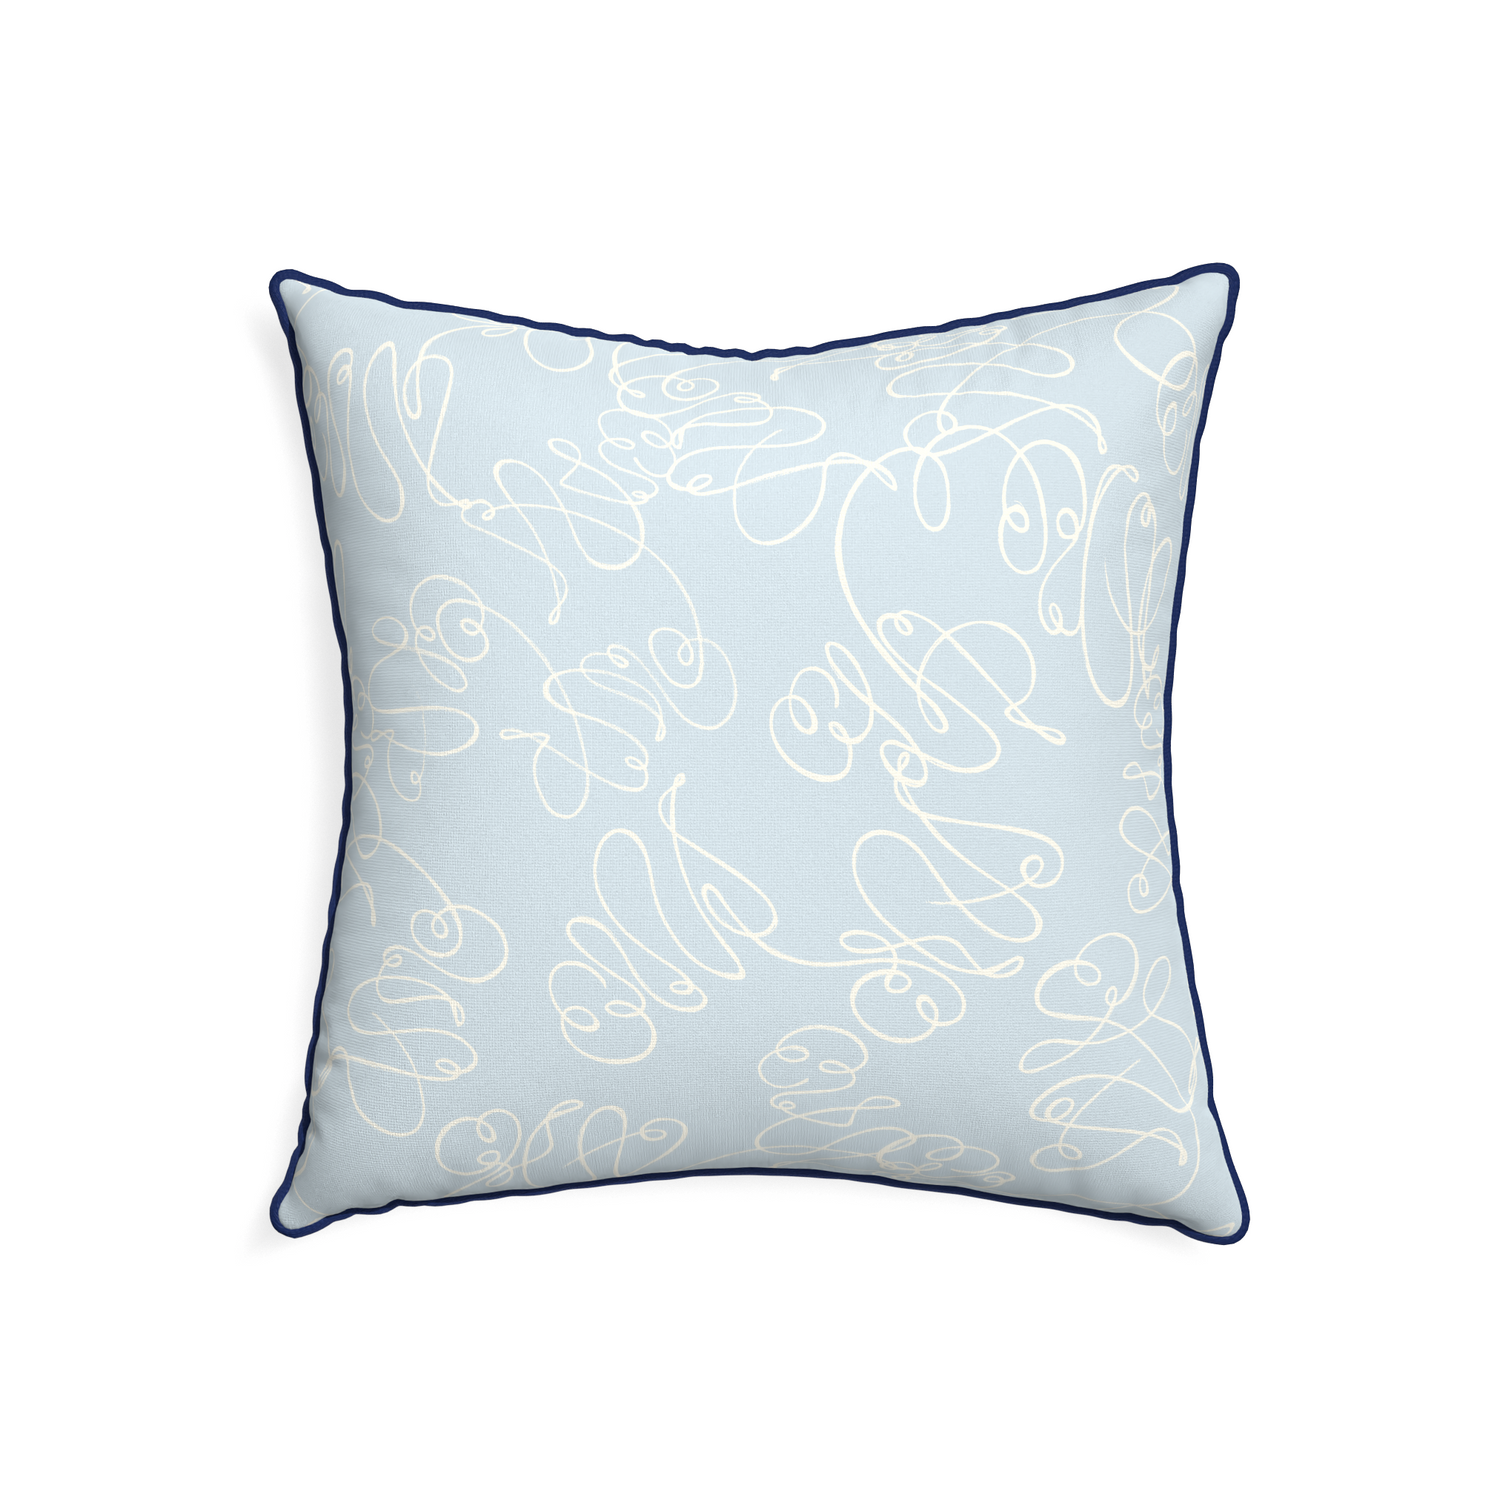 22-square mirabella custom pillow with midnight piping on white background